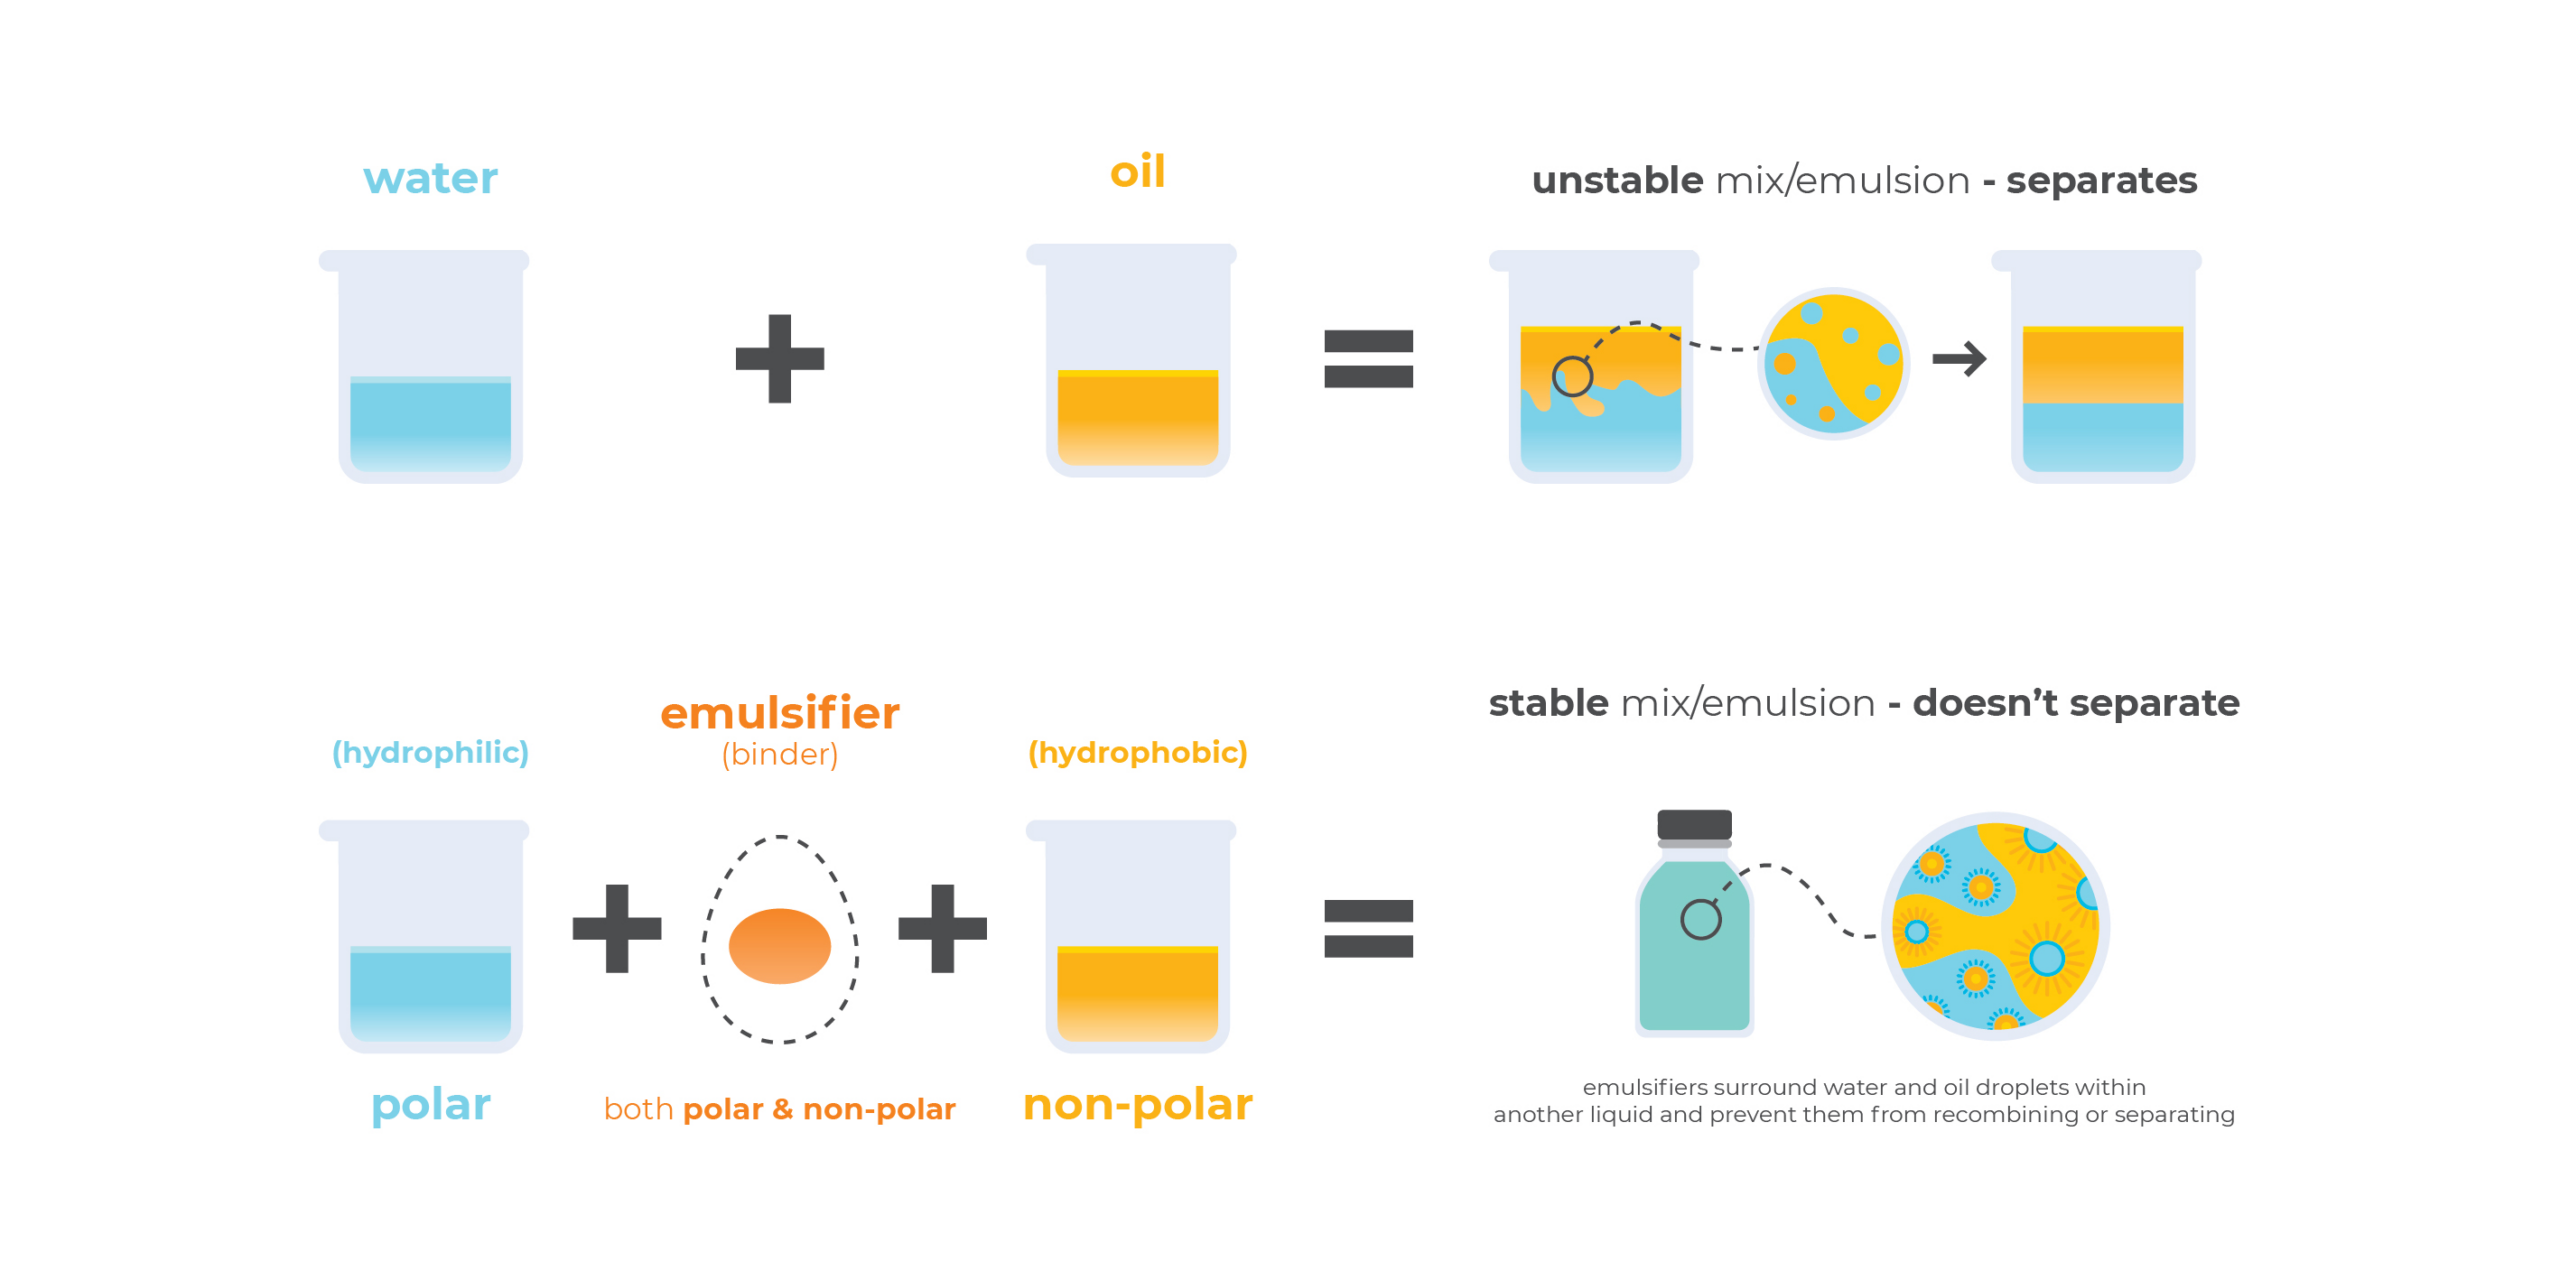 What Is an Emulsifier? Uses and Risks of Emulsifiers In Foods - Dr. Axe